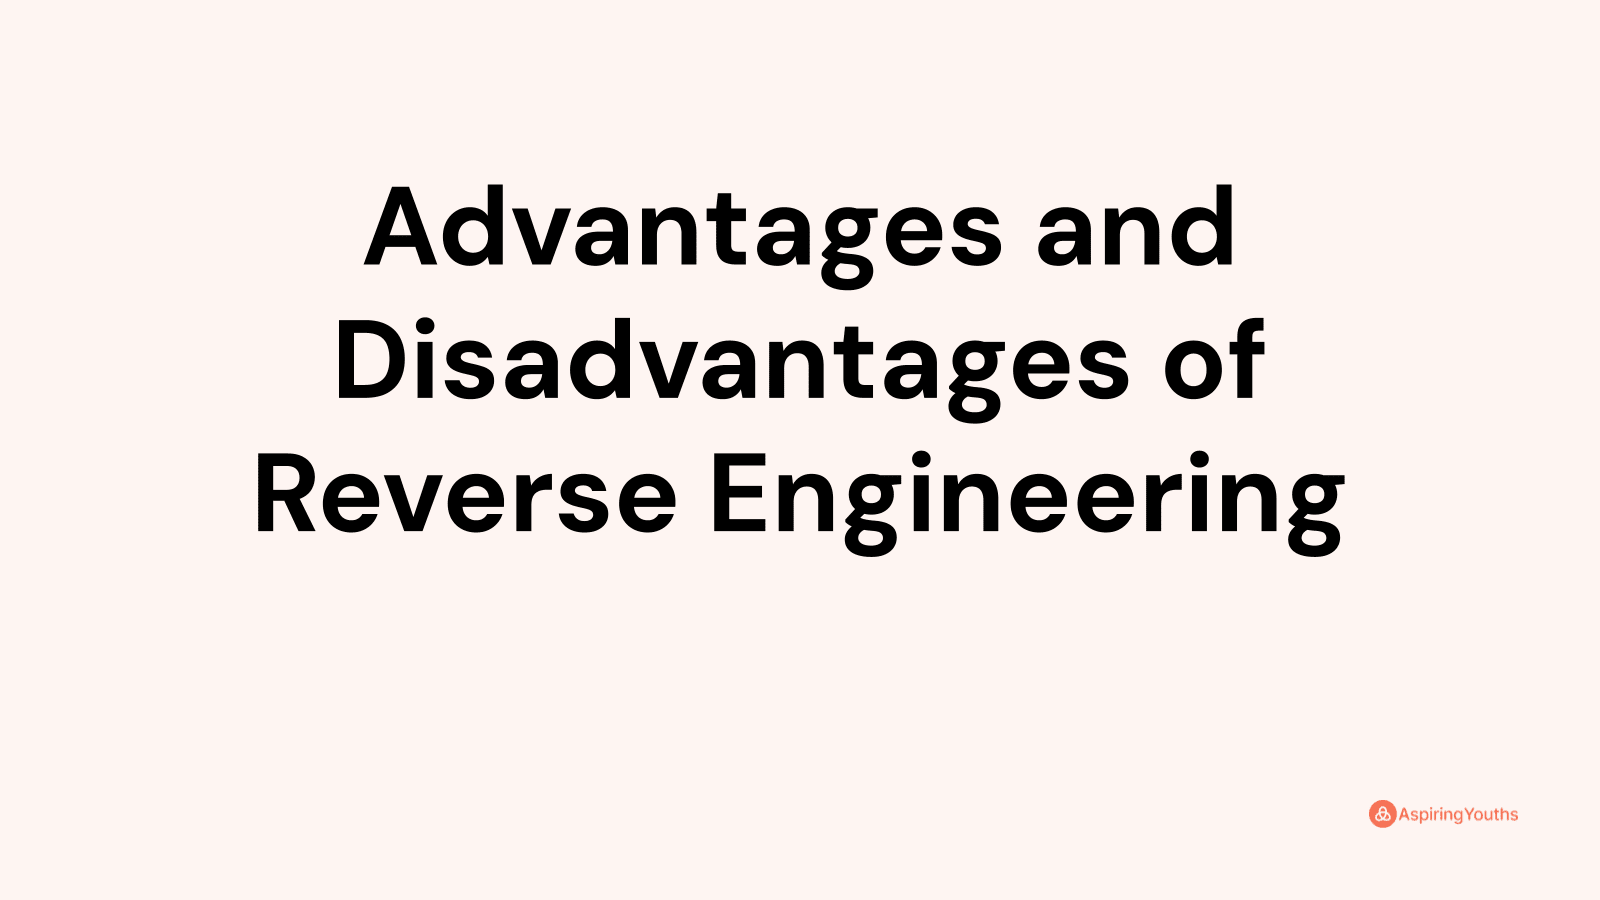 Advantages and disadvantages of Reverse Engineering